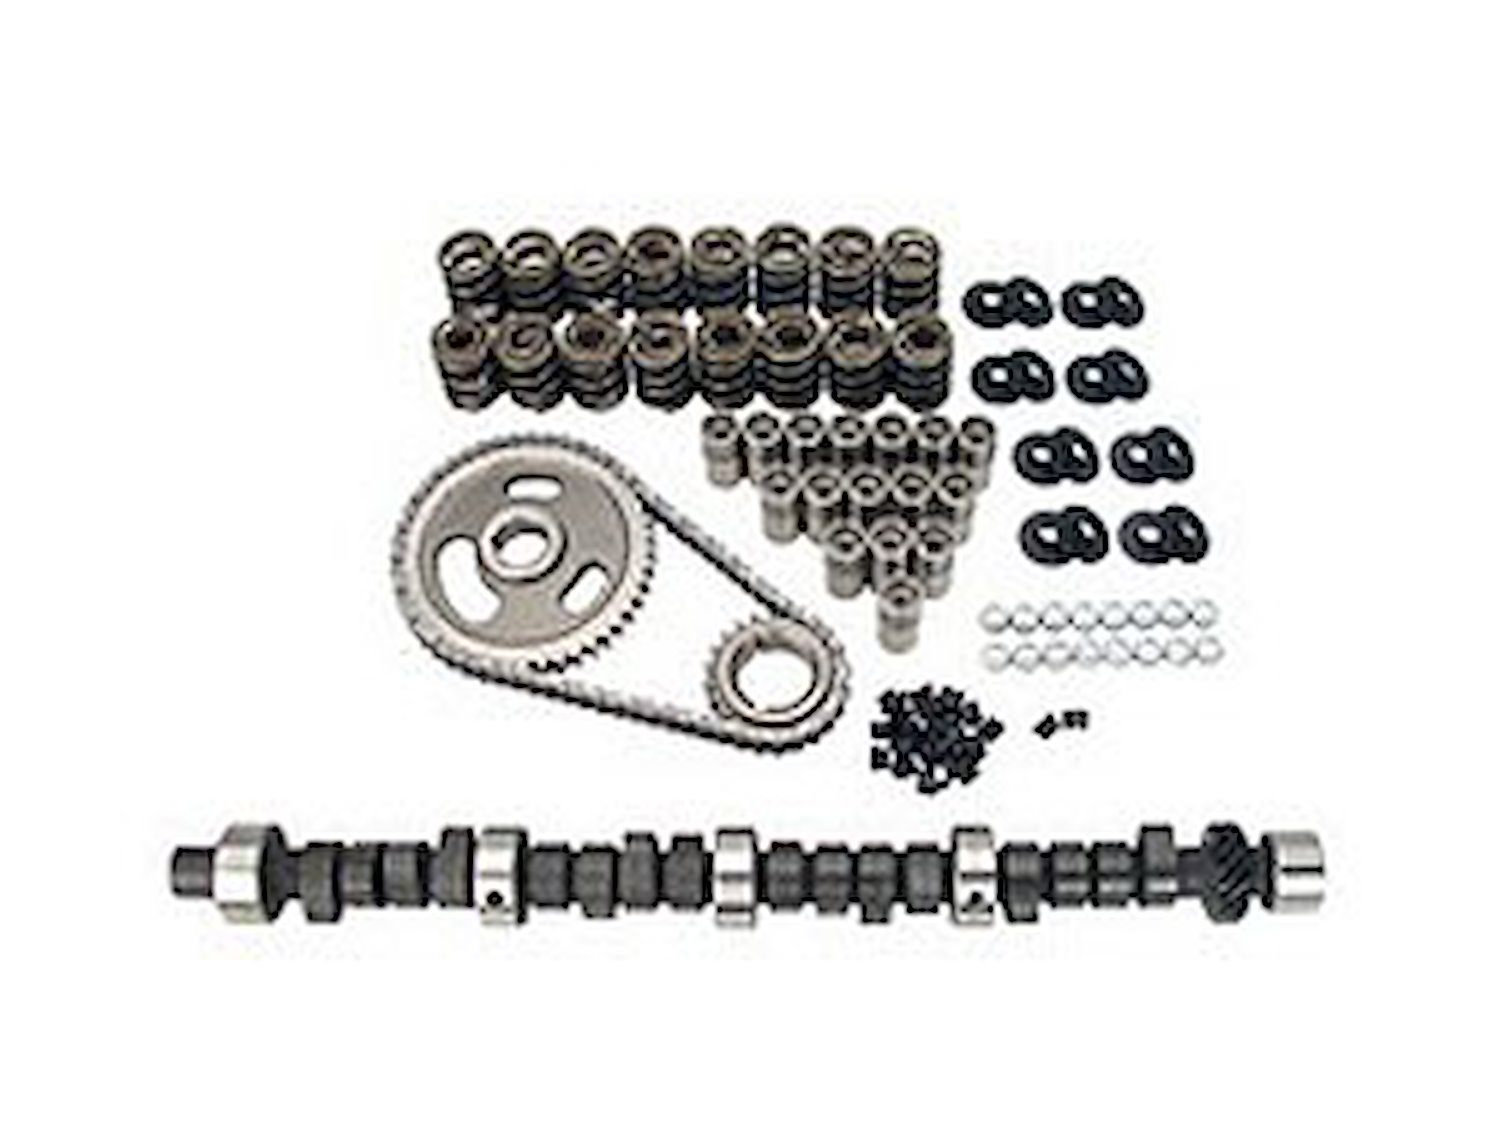 Xtreme Energy 284H Hydraulic Flat Tappet Camshaft Complete Kit Lift .507"/.510" Duration 284°/296° RPM Range 2300-6500